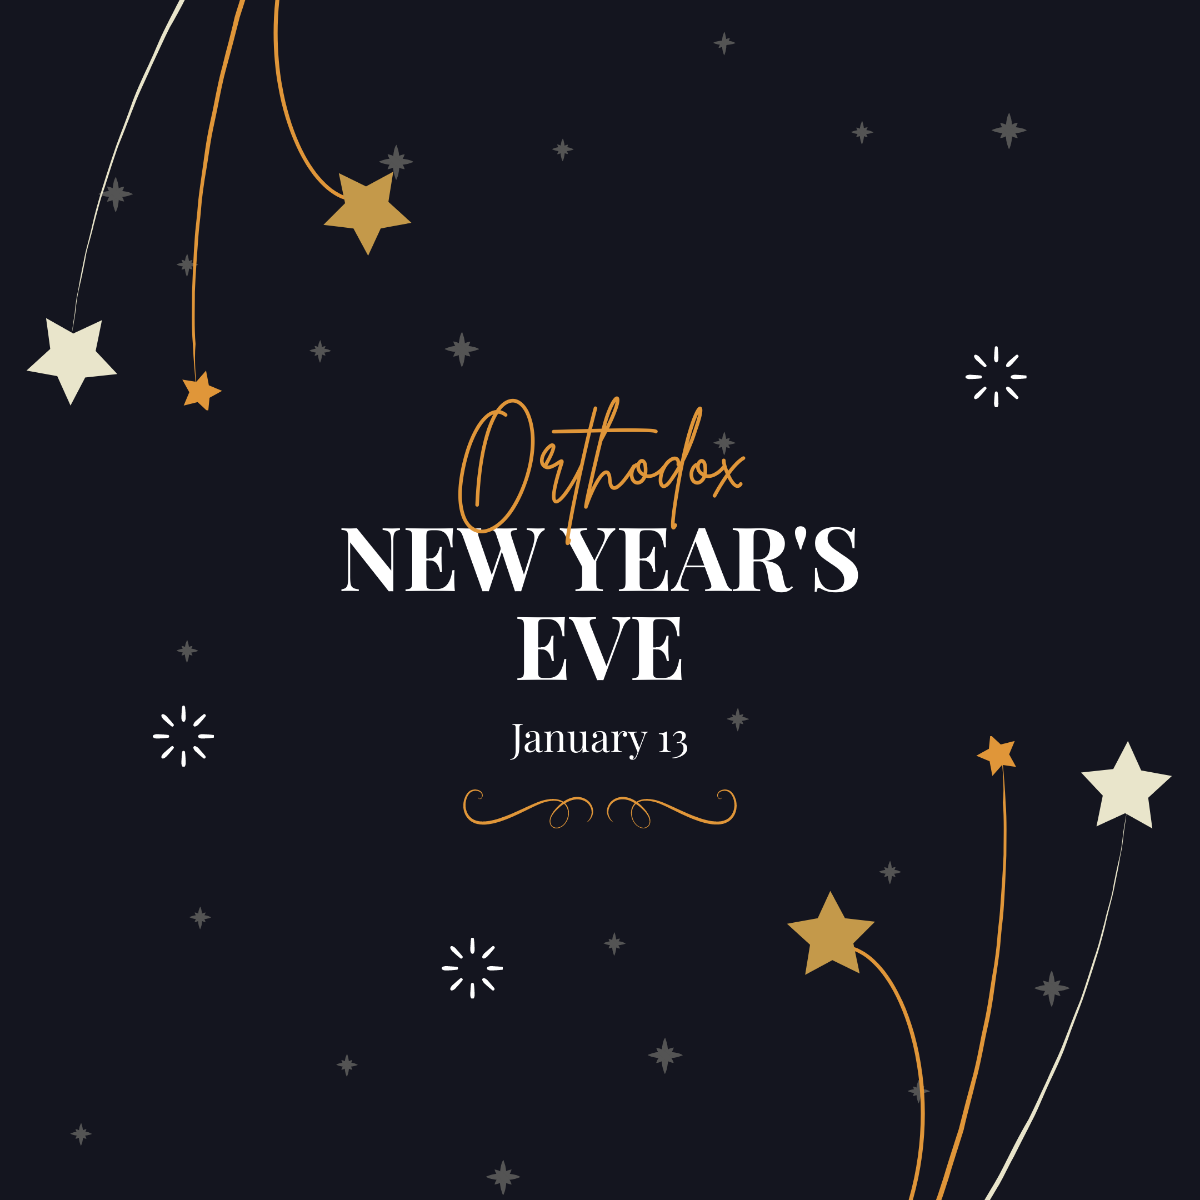 Free Orthodox New Year Eve Instagram Post Template